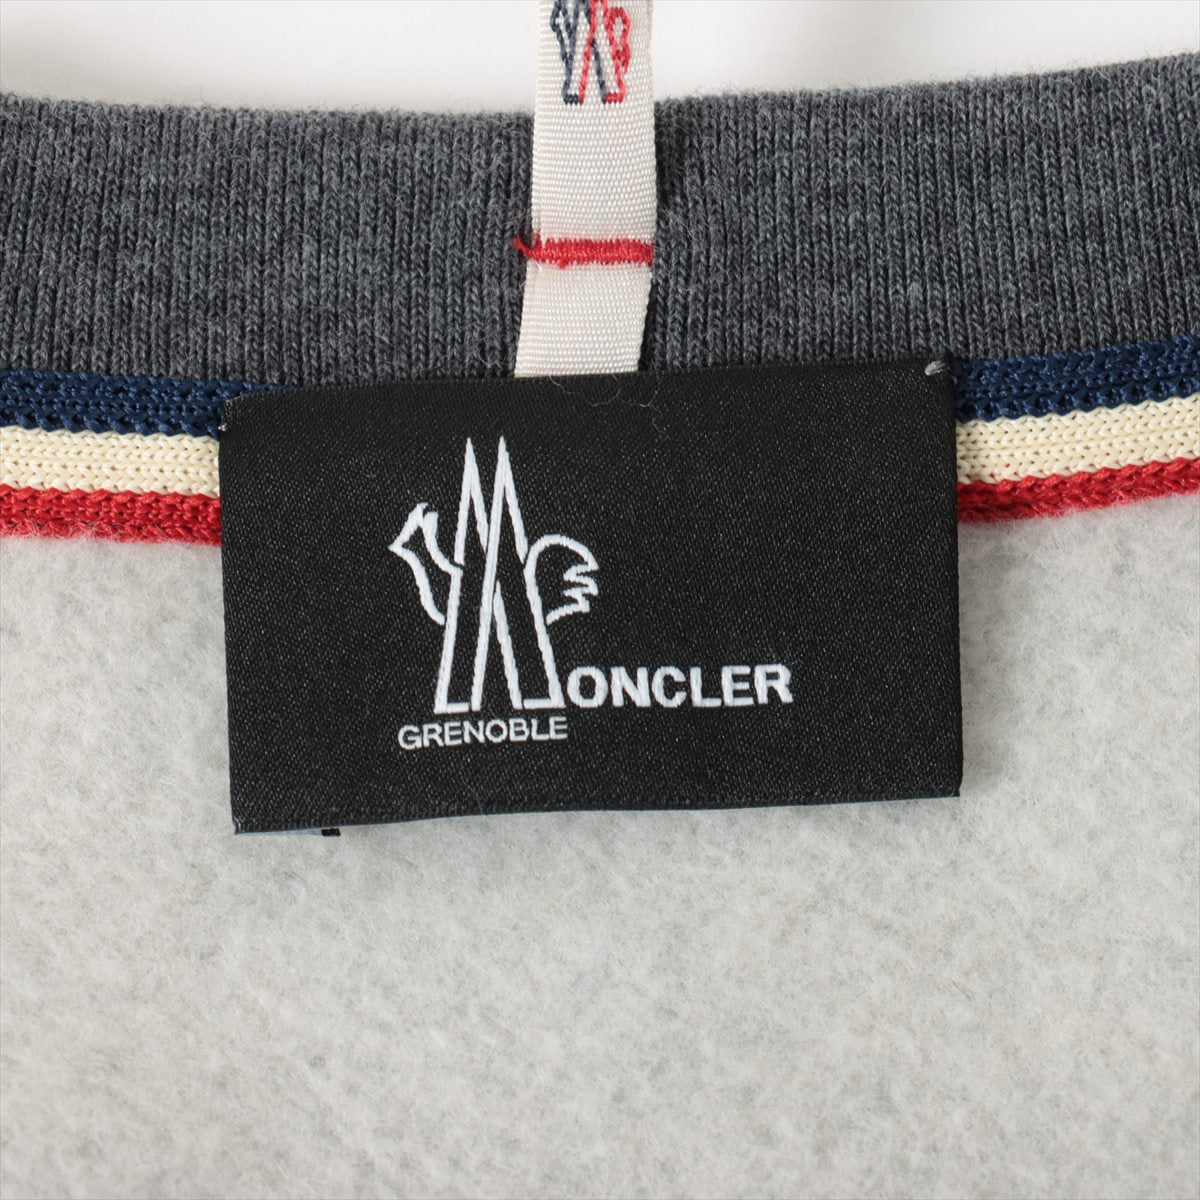 Moncler Grenoble 18 years Cotton & nylon Basic knitted fabric L Men's Grey